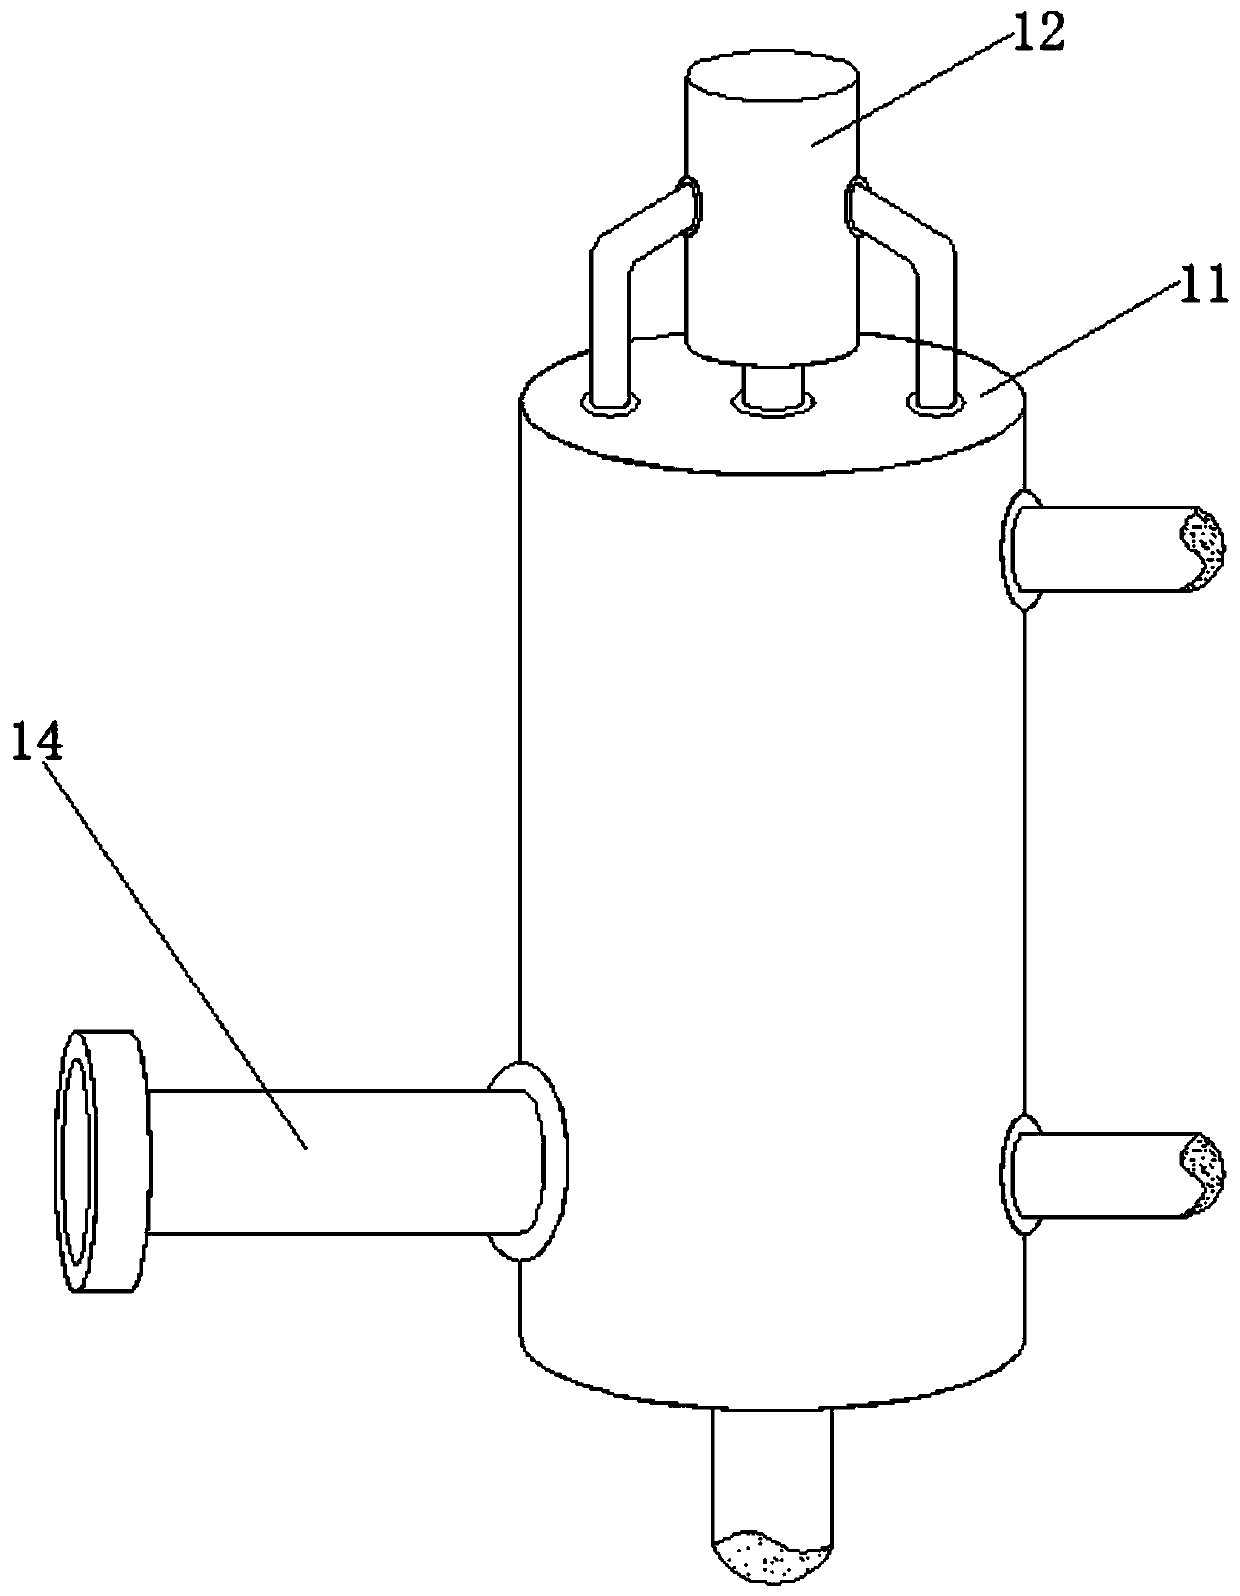 Pesticide sprinkling device used for agricultural machinery